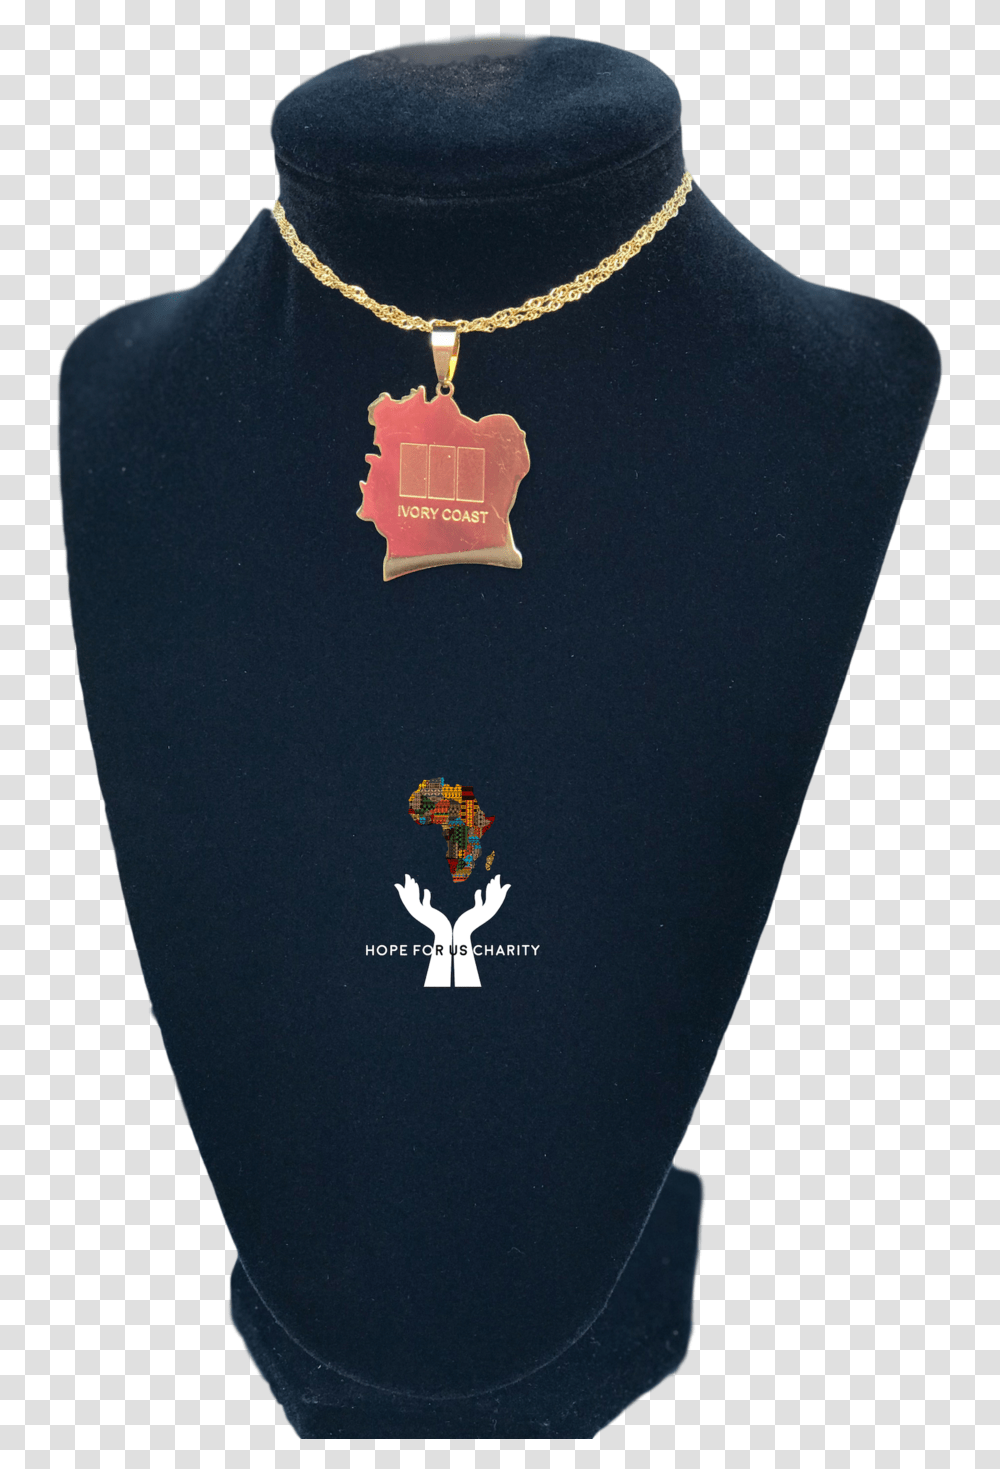 Somalia Necklace - The Hope For Us Charity Gold Chains, Pendant, Person, Human, Hook Transparent Png